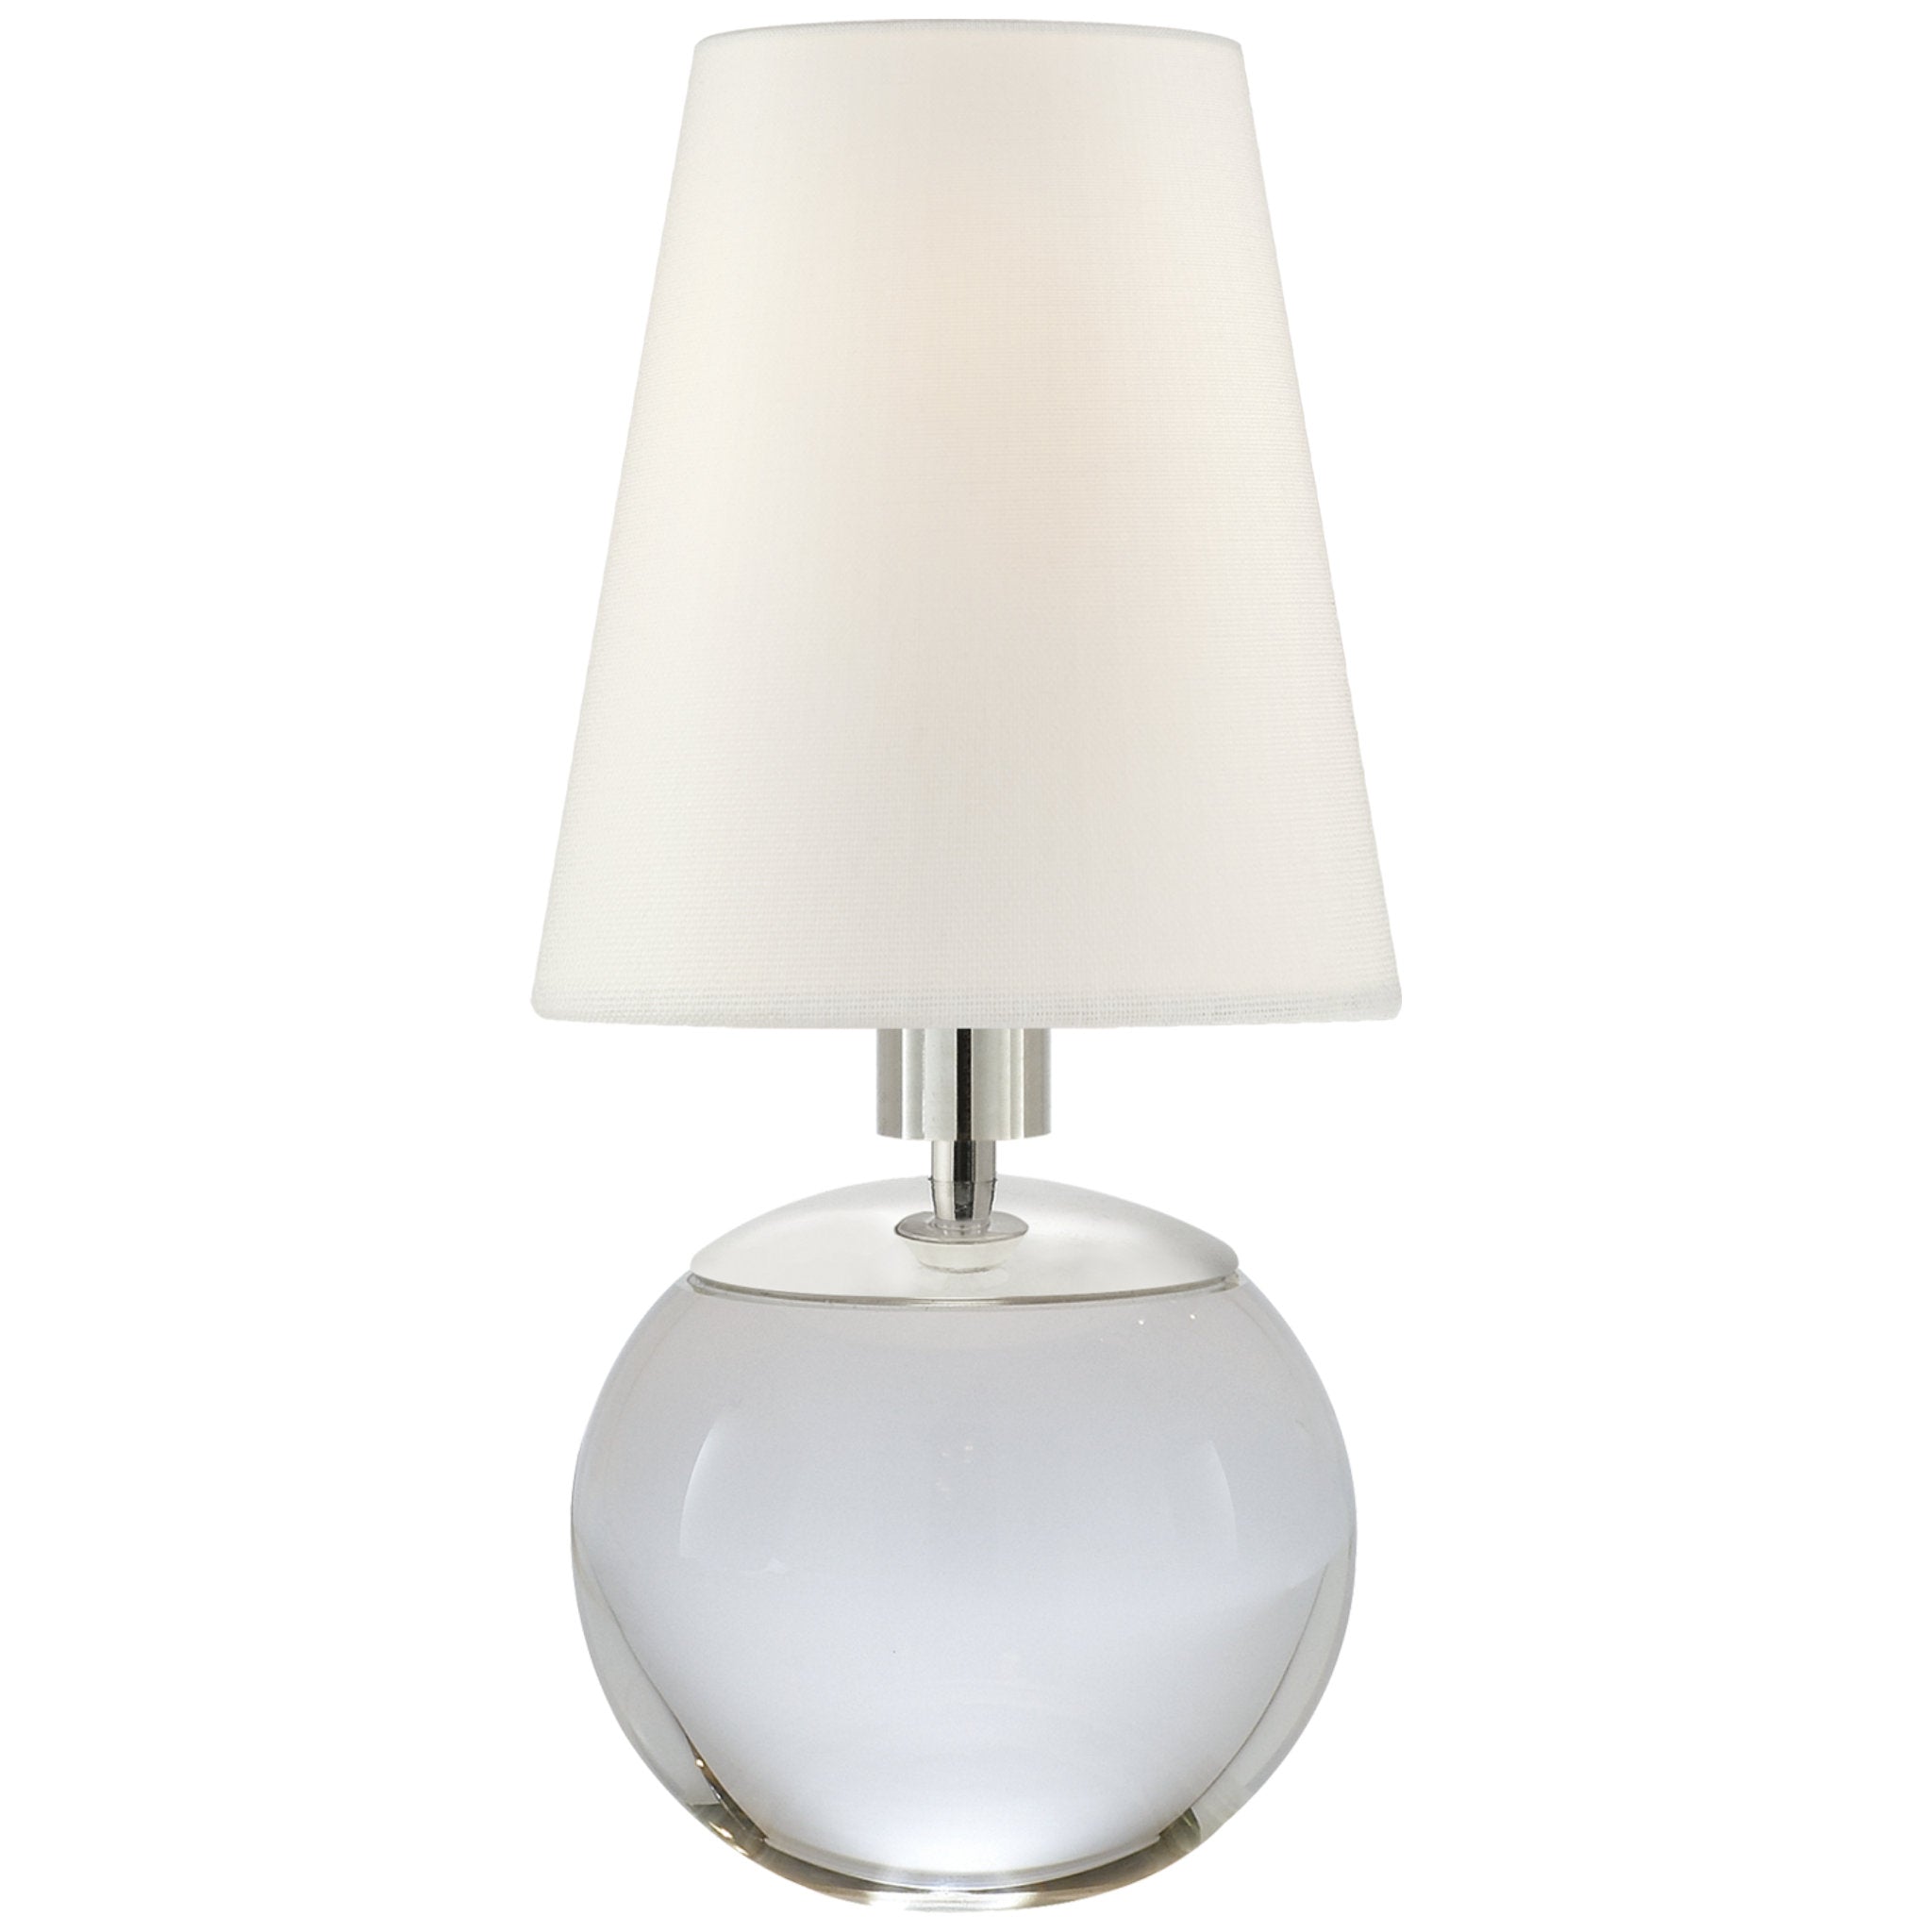 Thomas O'Brien Tiny Terri Round Accent Lamp in Crystal with Linen Shade